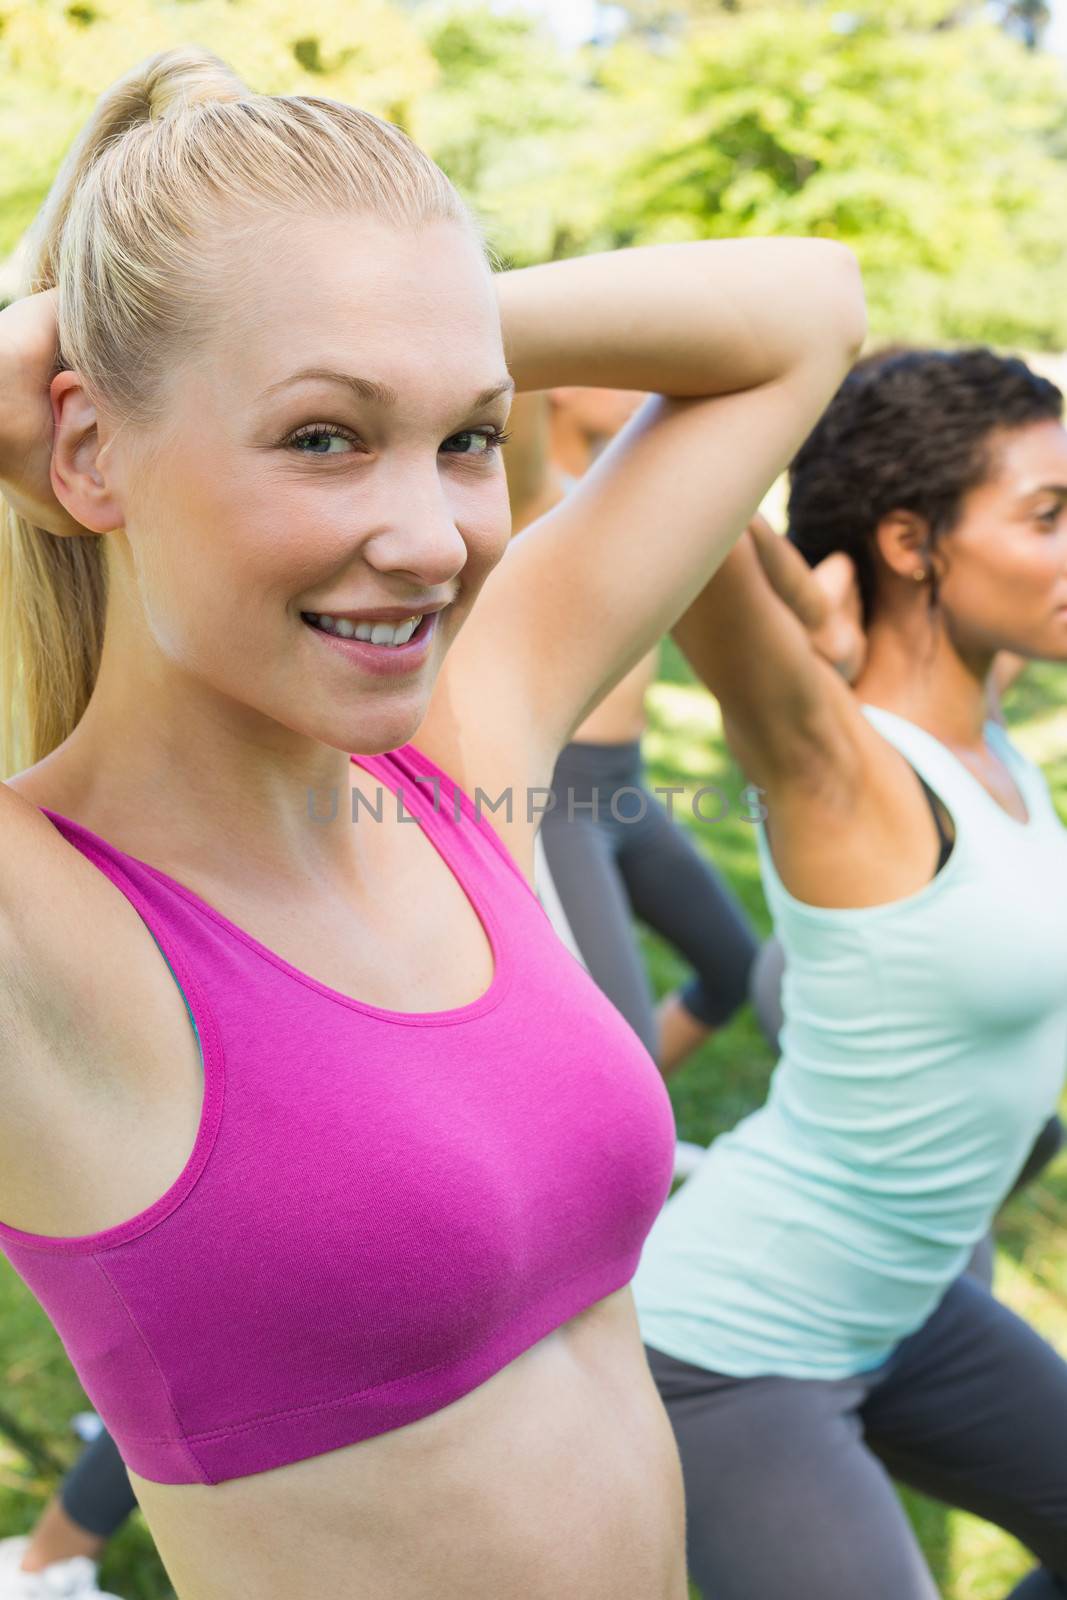 Portrait of beautiful woman exercising with friends in park